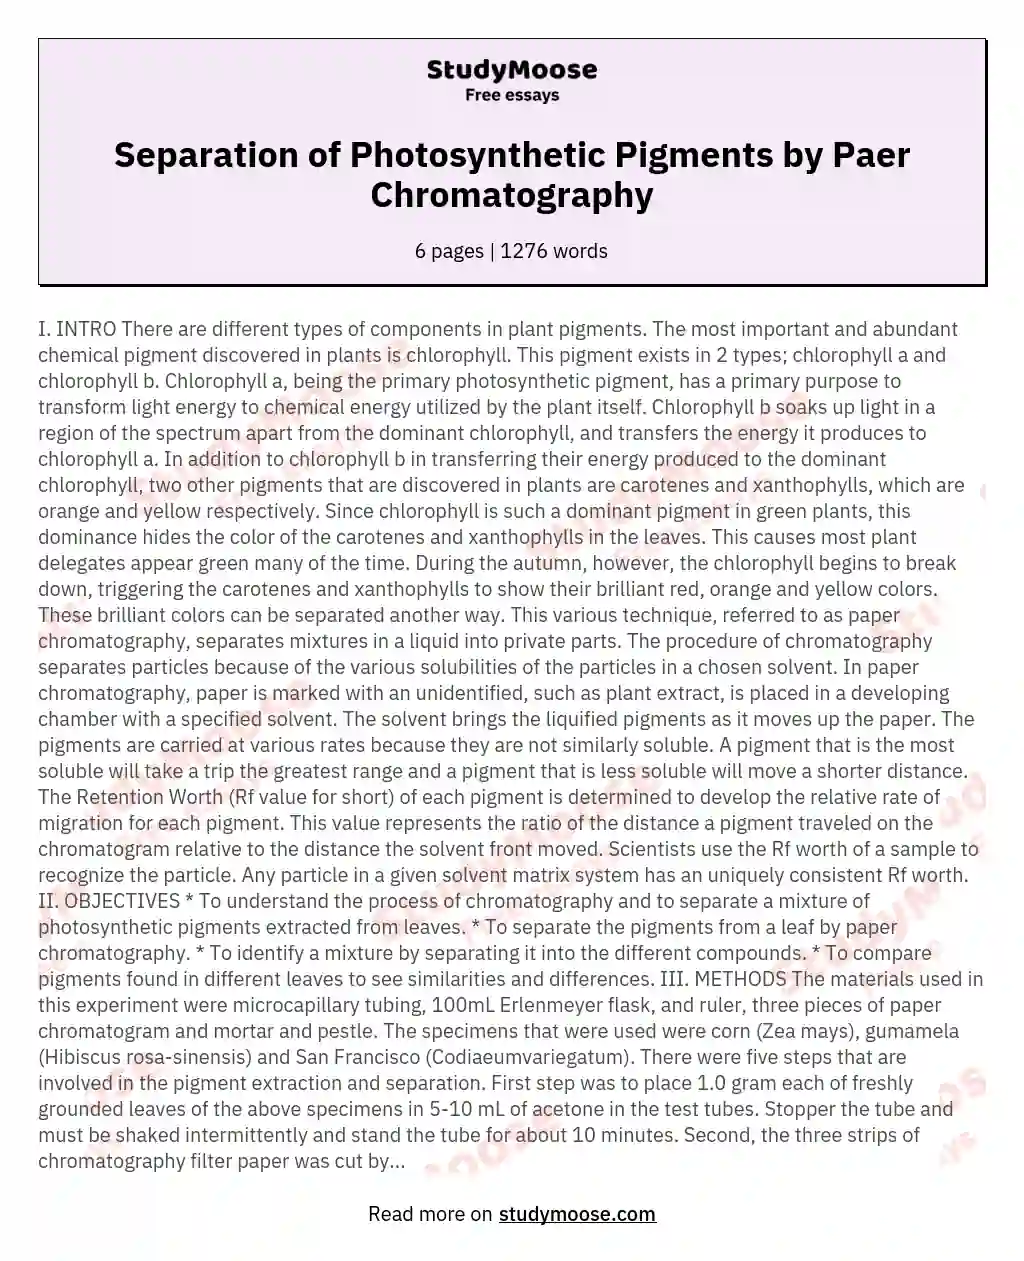 Separation of Photosynthetic Pigments by Paer Chromatography